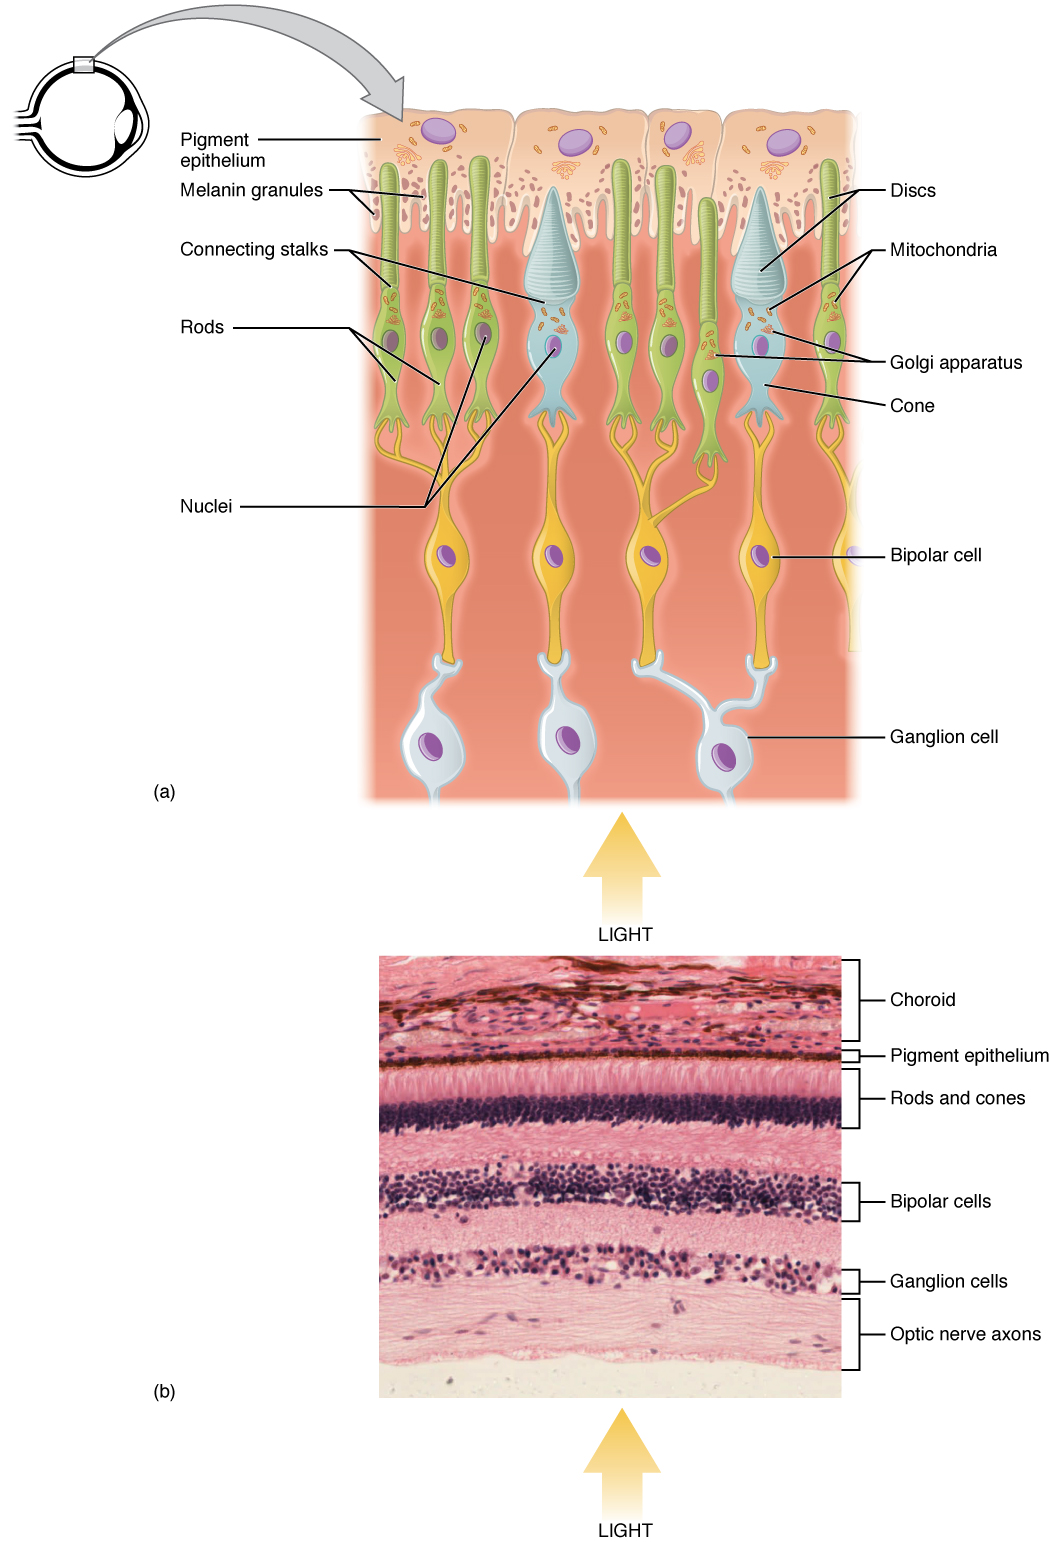 Retina with rods & cones and micrograph of retina